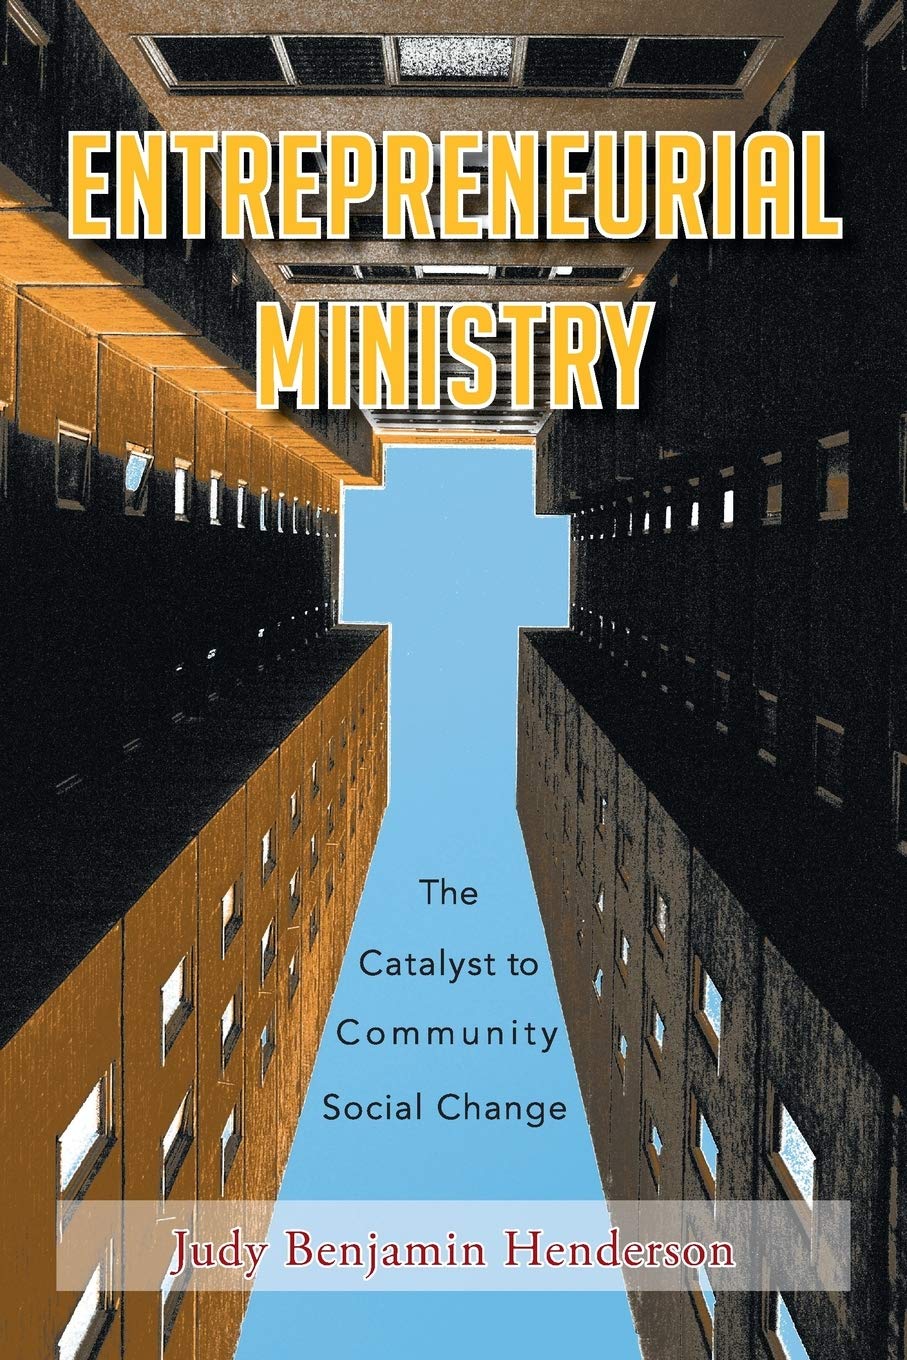 Judy B. Henderson’s "ENTREPRENEURIAL MINISTRY: The Catalyst to Community Social Change" Calls for Going Beyond Duties